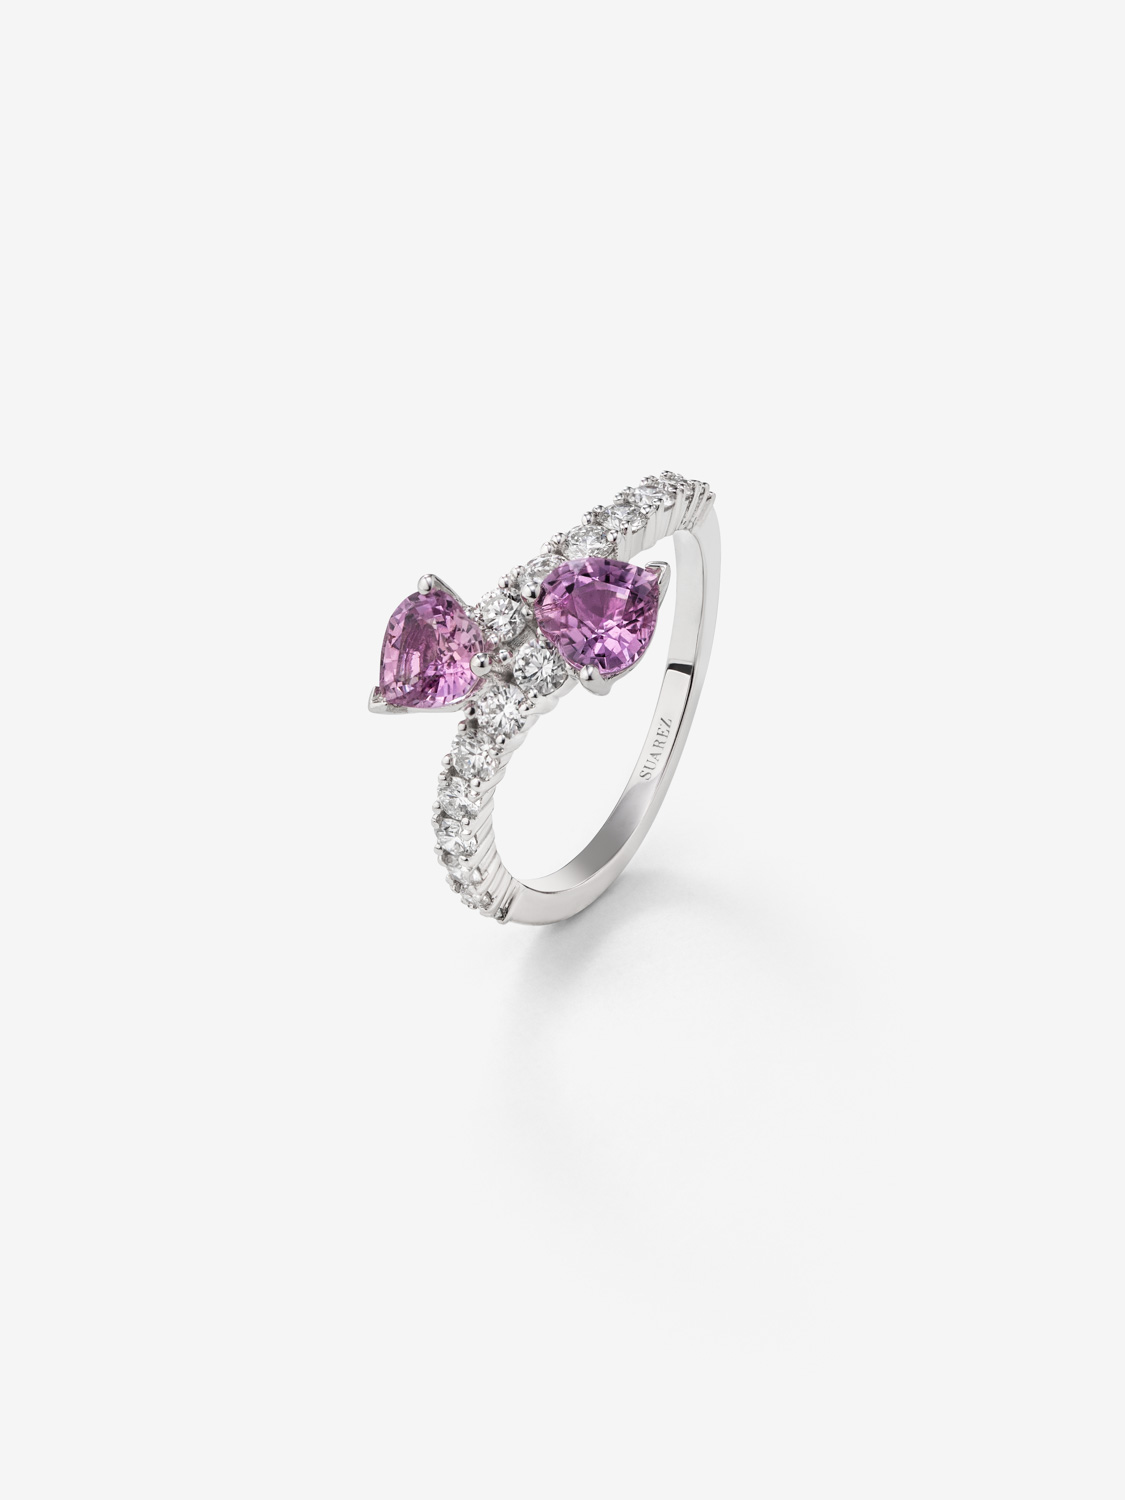 You and I 18k White Gold Ring with pink sapphires in 1.52 cts and white diamonds in a bright 0.6 cts diamonds